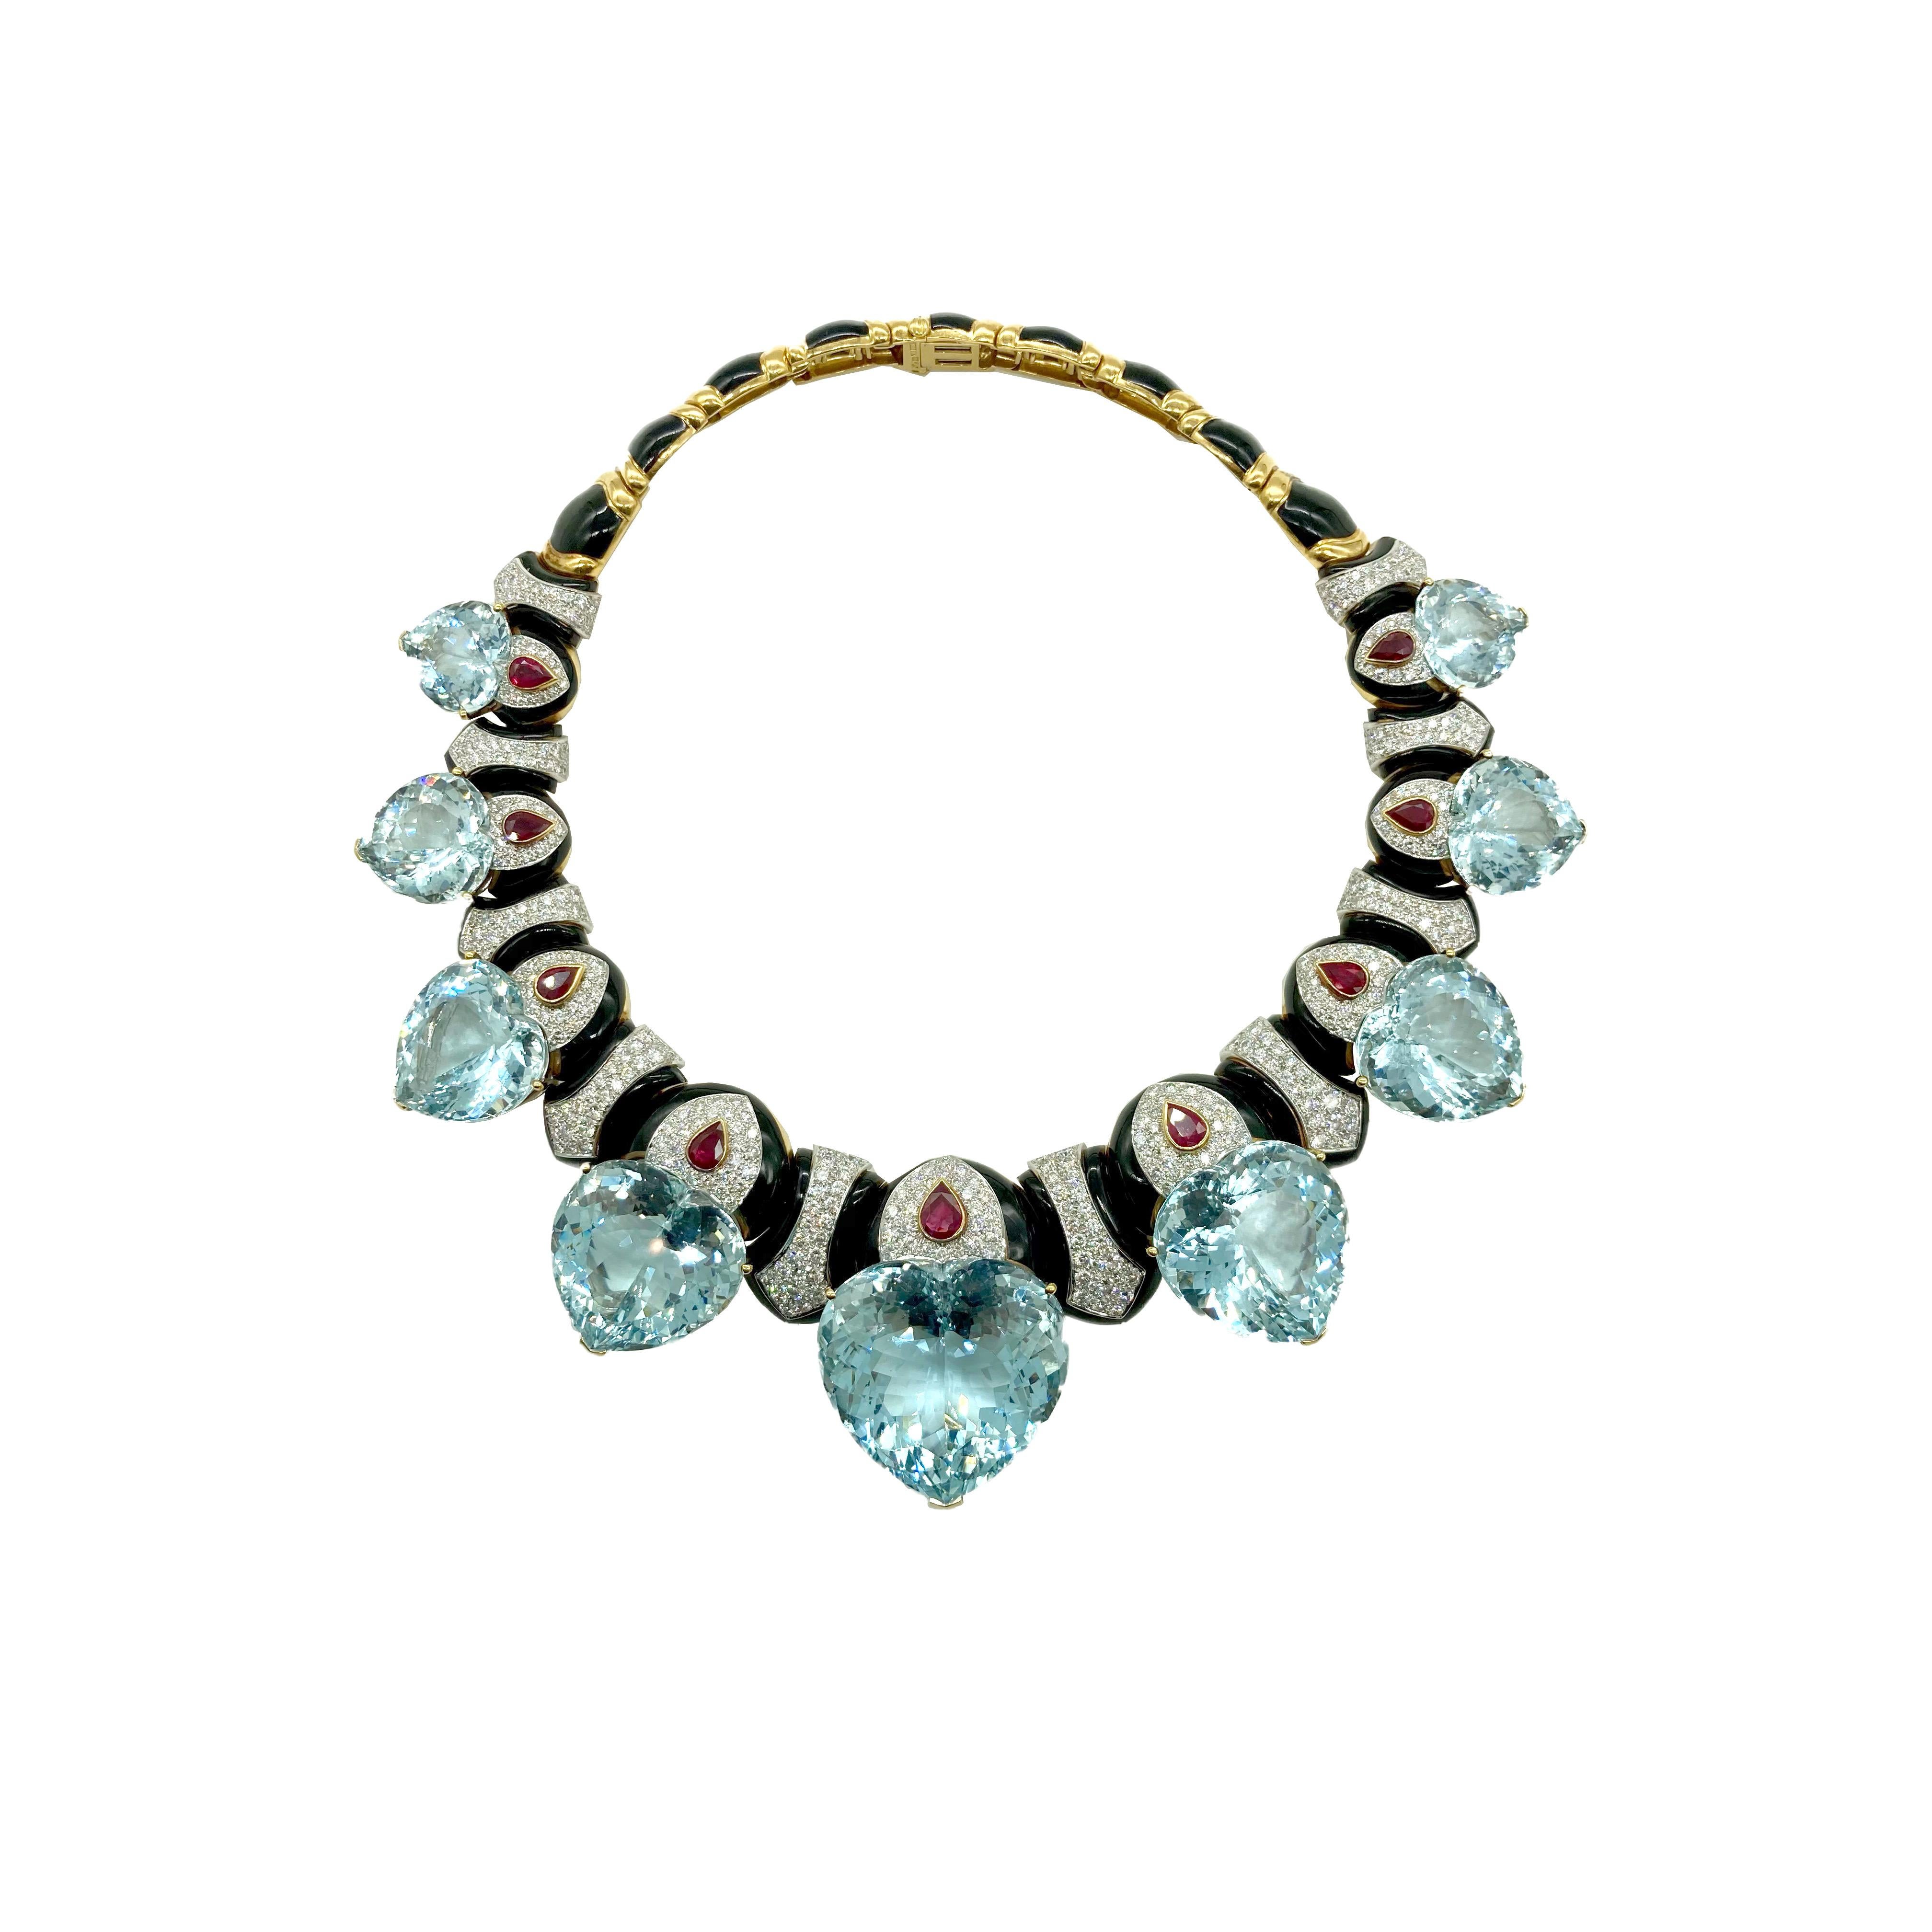 An exquisite David Webb demi-parure comprised of a necklace and earclips in 18 karat yellow gold, featuring chunky heart-shaped aquamarines, pear-shaped rubies, black onyx, and diamonds. Circa 1970.